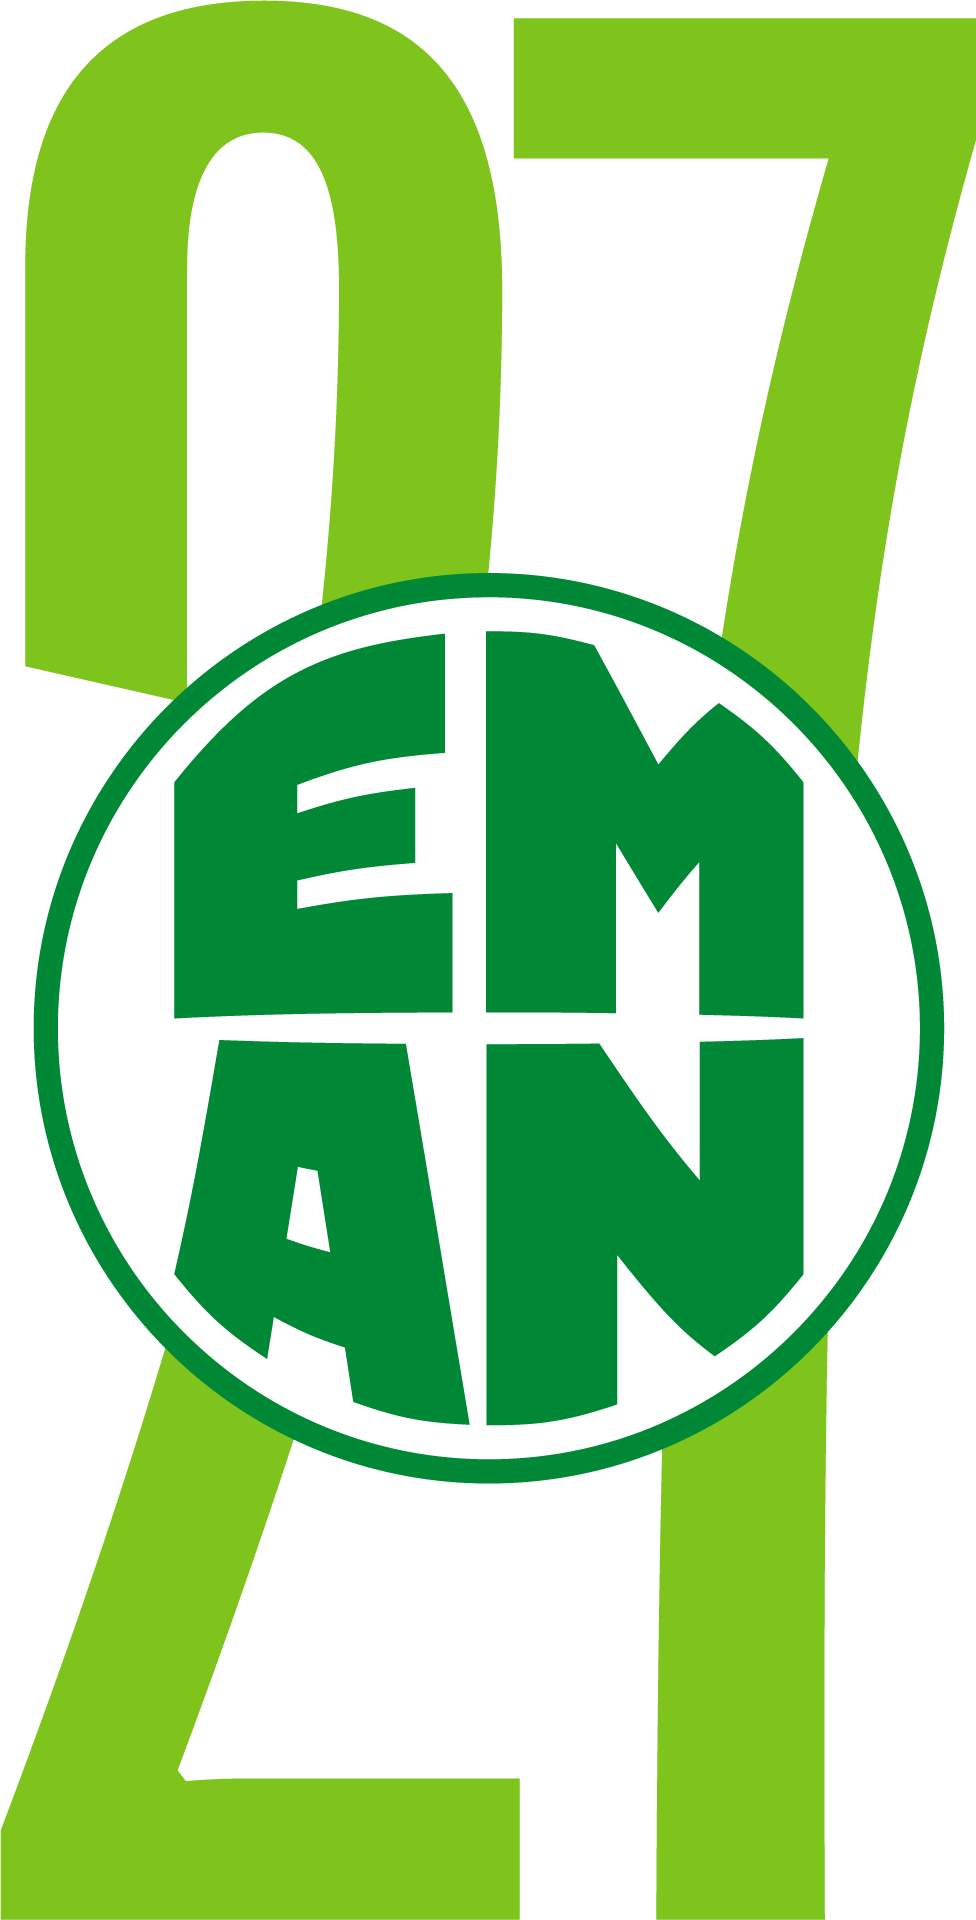 27th Conference of the Environmental and Sustainability Management Accounting Network (EMAN Europe)